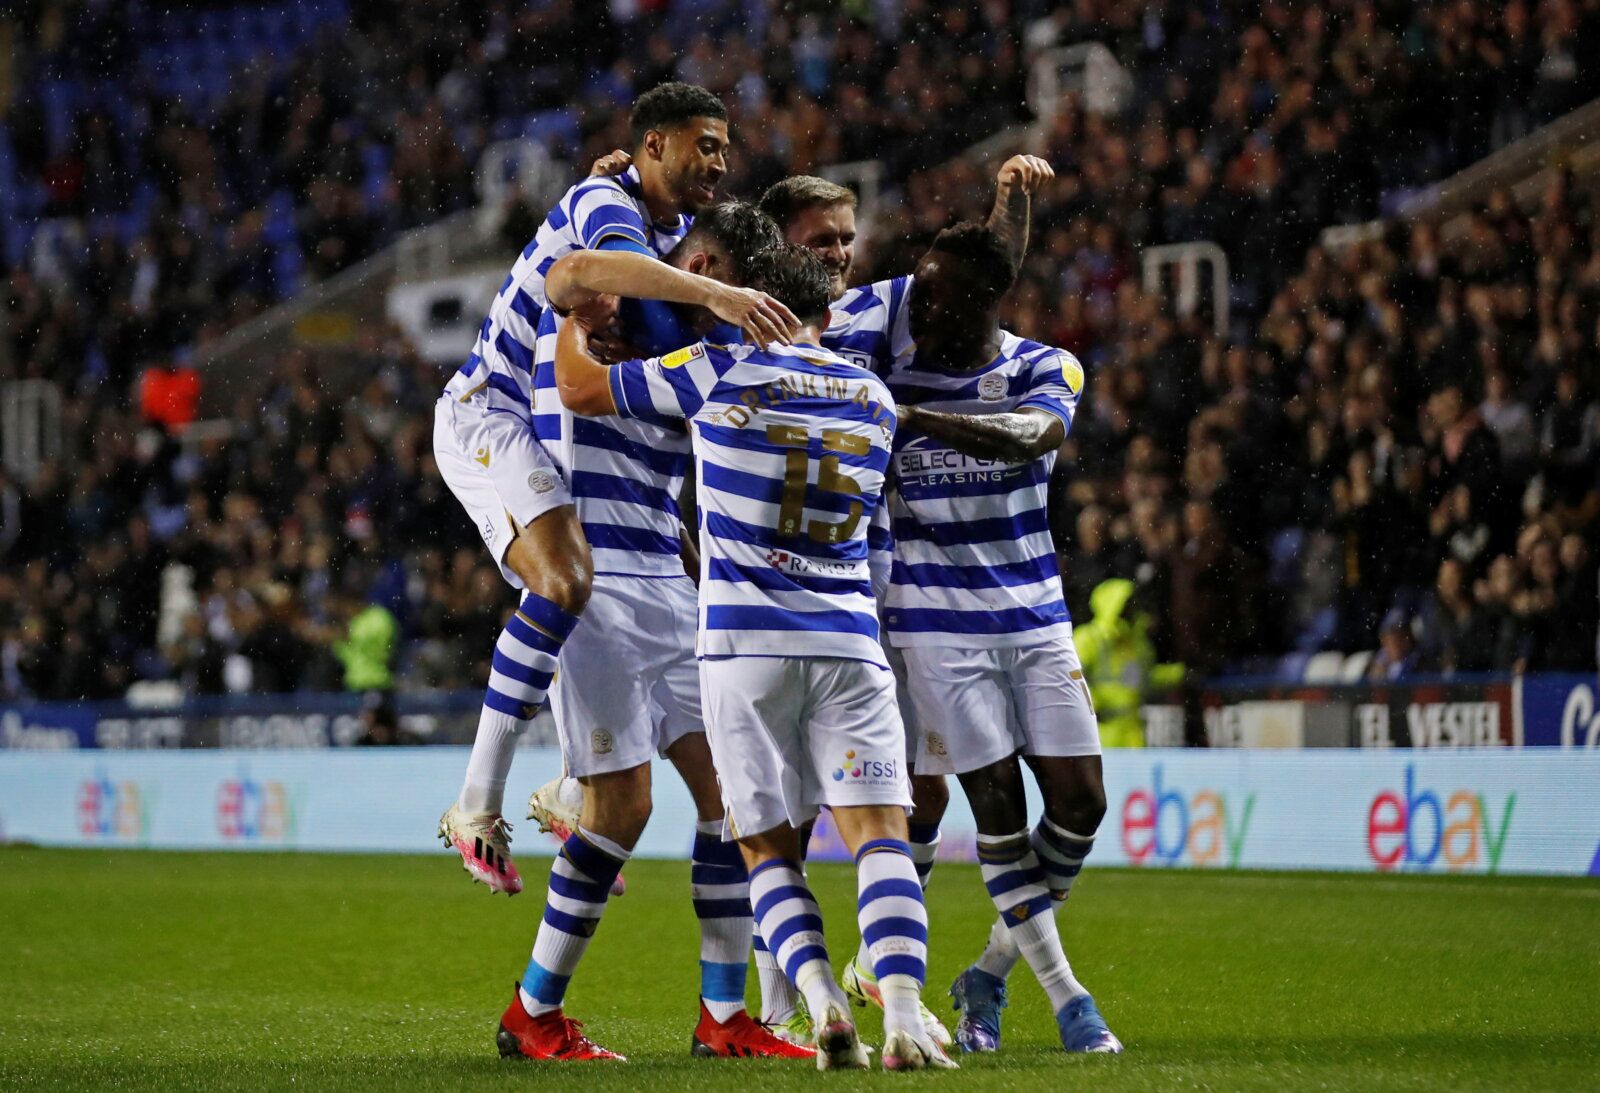 Soccer Football - Championship - Reading v Blackpool - Madejski Stadium, Reading, Britain - October 20, 2021 Reading's Scott Dann celebrates scoring their first goal with teammates  Action Images/Andrew Boyers  EDITORIAL USE ONLY. No use with unauthorized audio, video, data, fixture lists, club/league logos or 